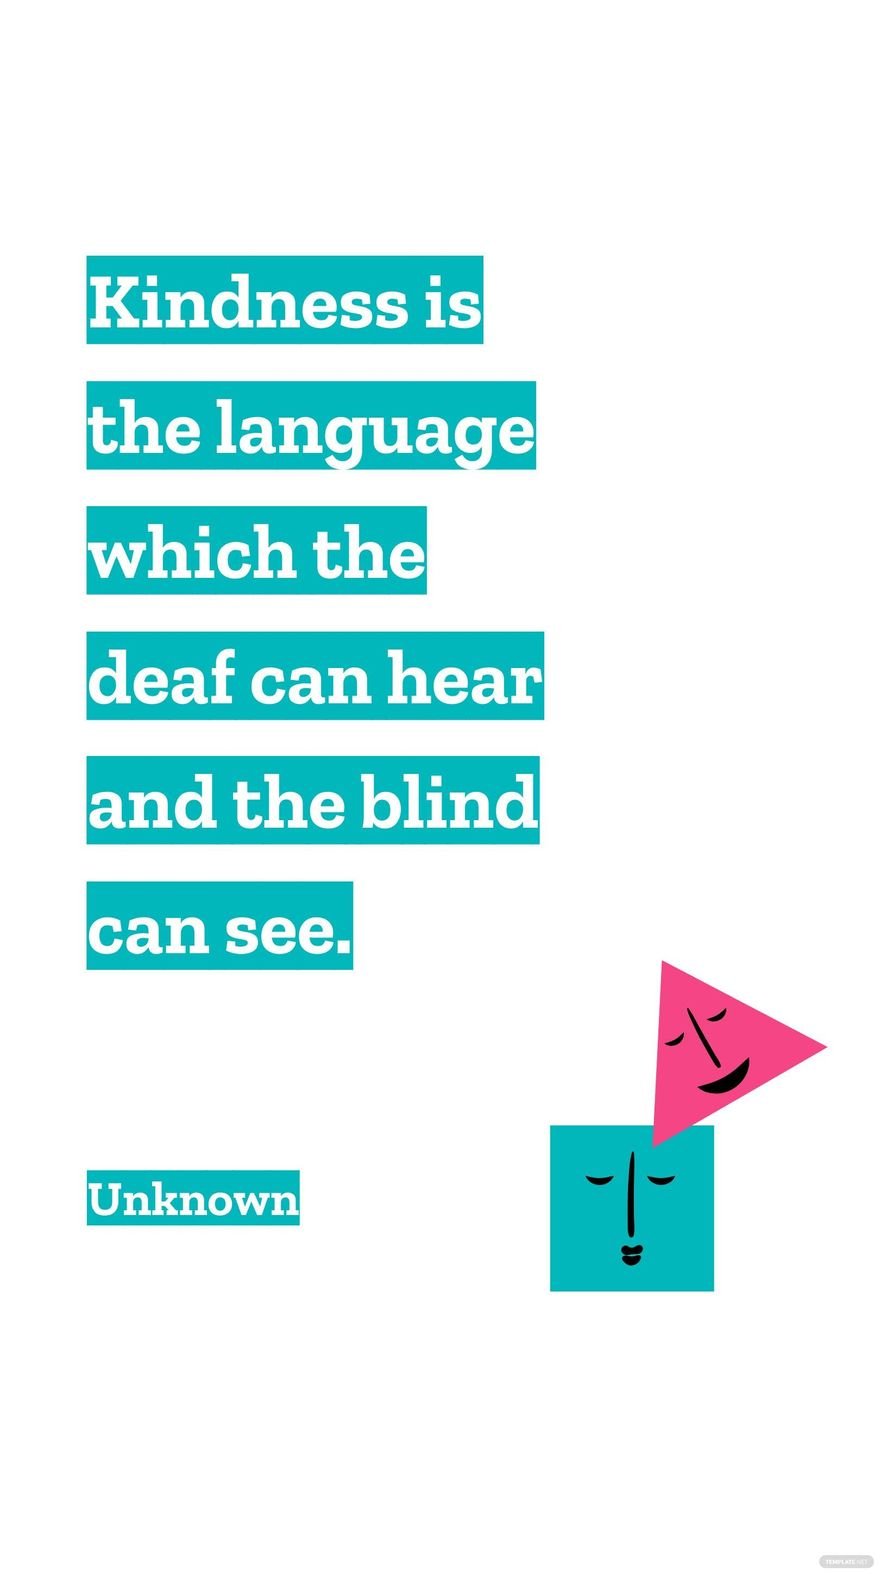 Unknown - Kindness is the language which the deaf can hear and the blind can see.